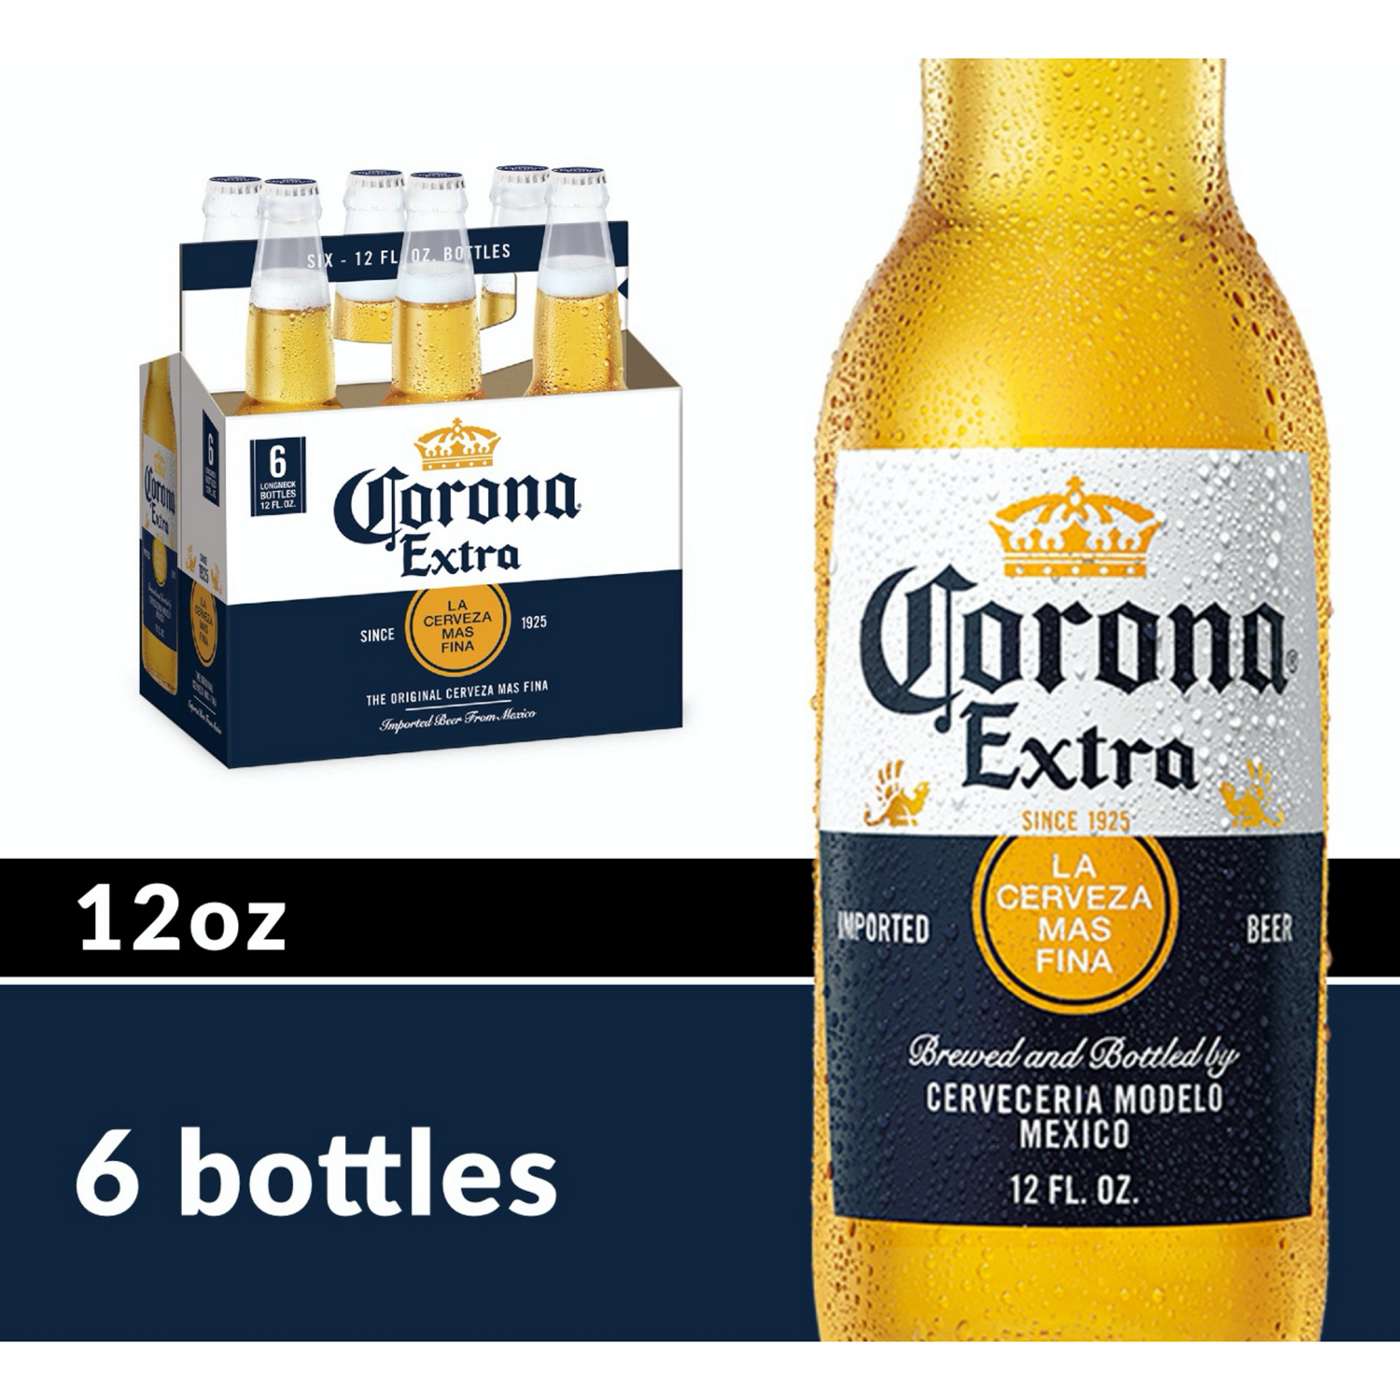 Corona Extra Mexican Lager Import Beer 12 oz Bottles, 6 pk; image 4 of 10